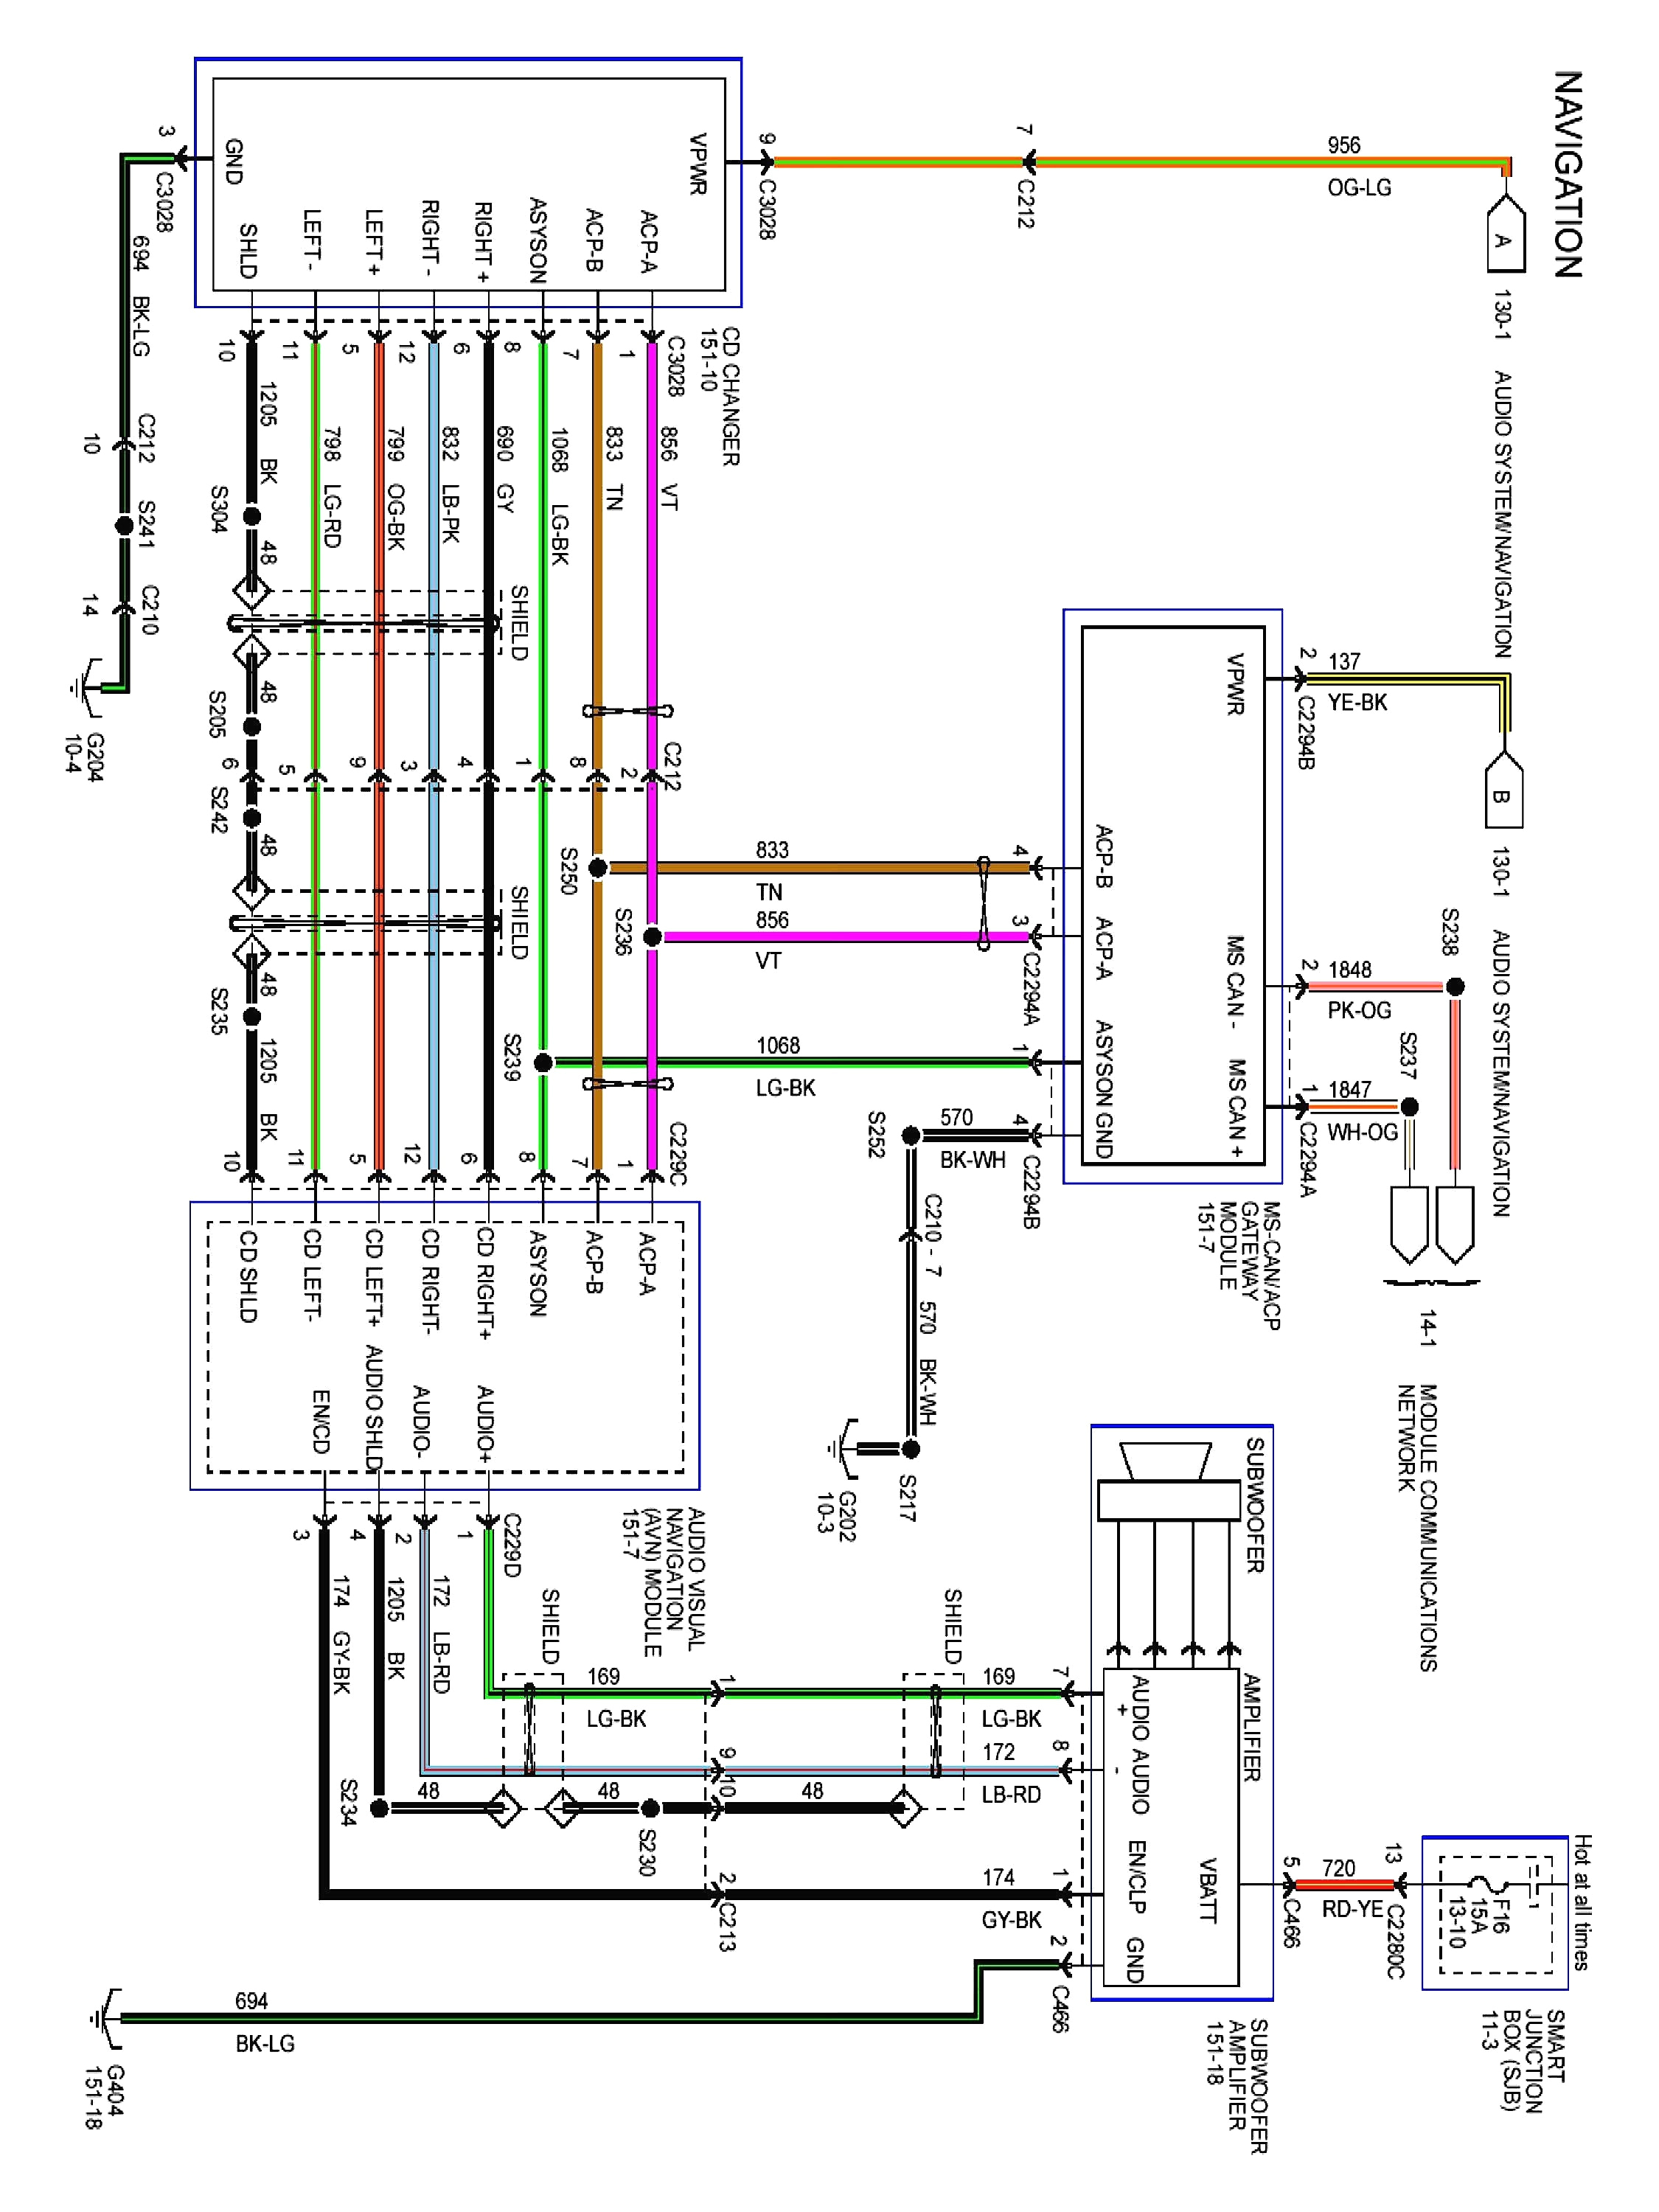 Ford F150 Wiring Harness Diagram 1991 ford F 150 Wiring Harness Wiring Diagram Paper